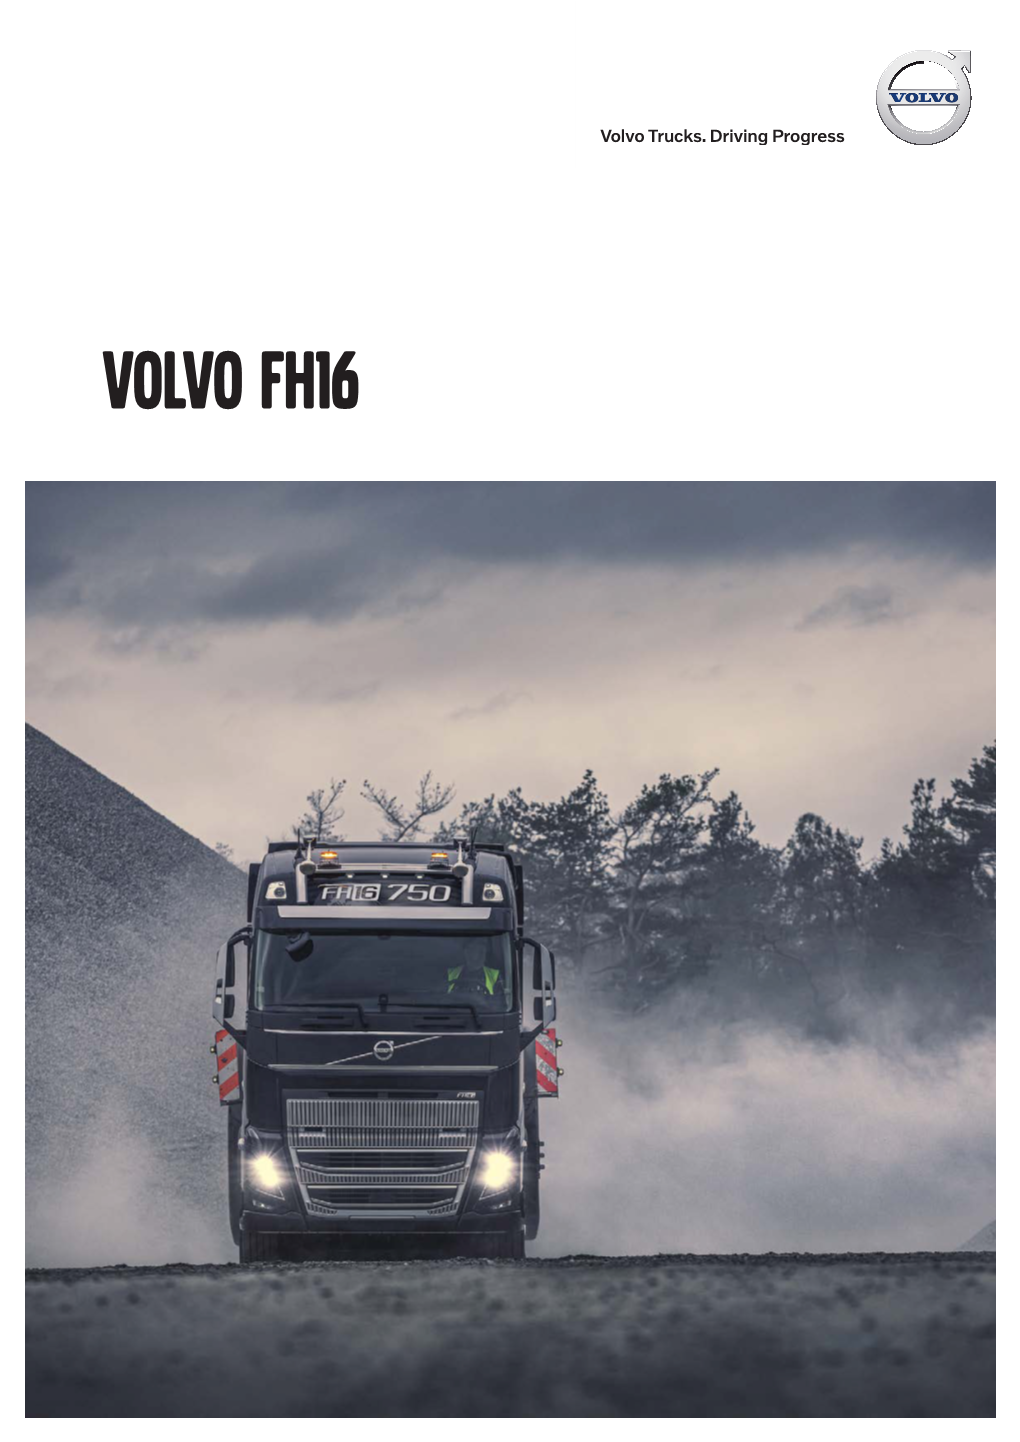 VOLVO FH16 2 | VOLVO FH16 the VOLVO FH16 Evolution by Volvo Trucks 4 | VOLVO FH16 Ready for Your Challenges